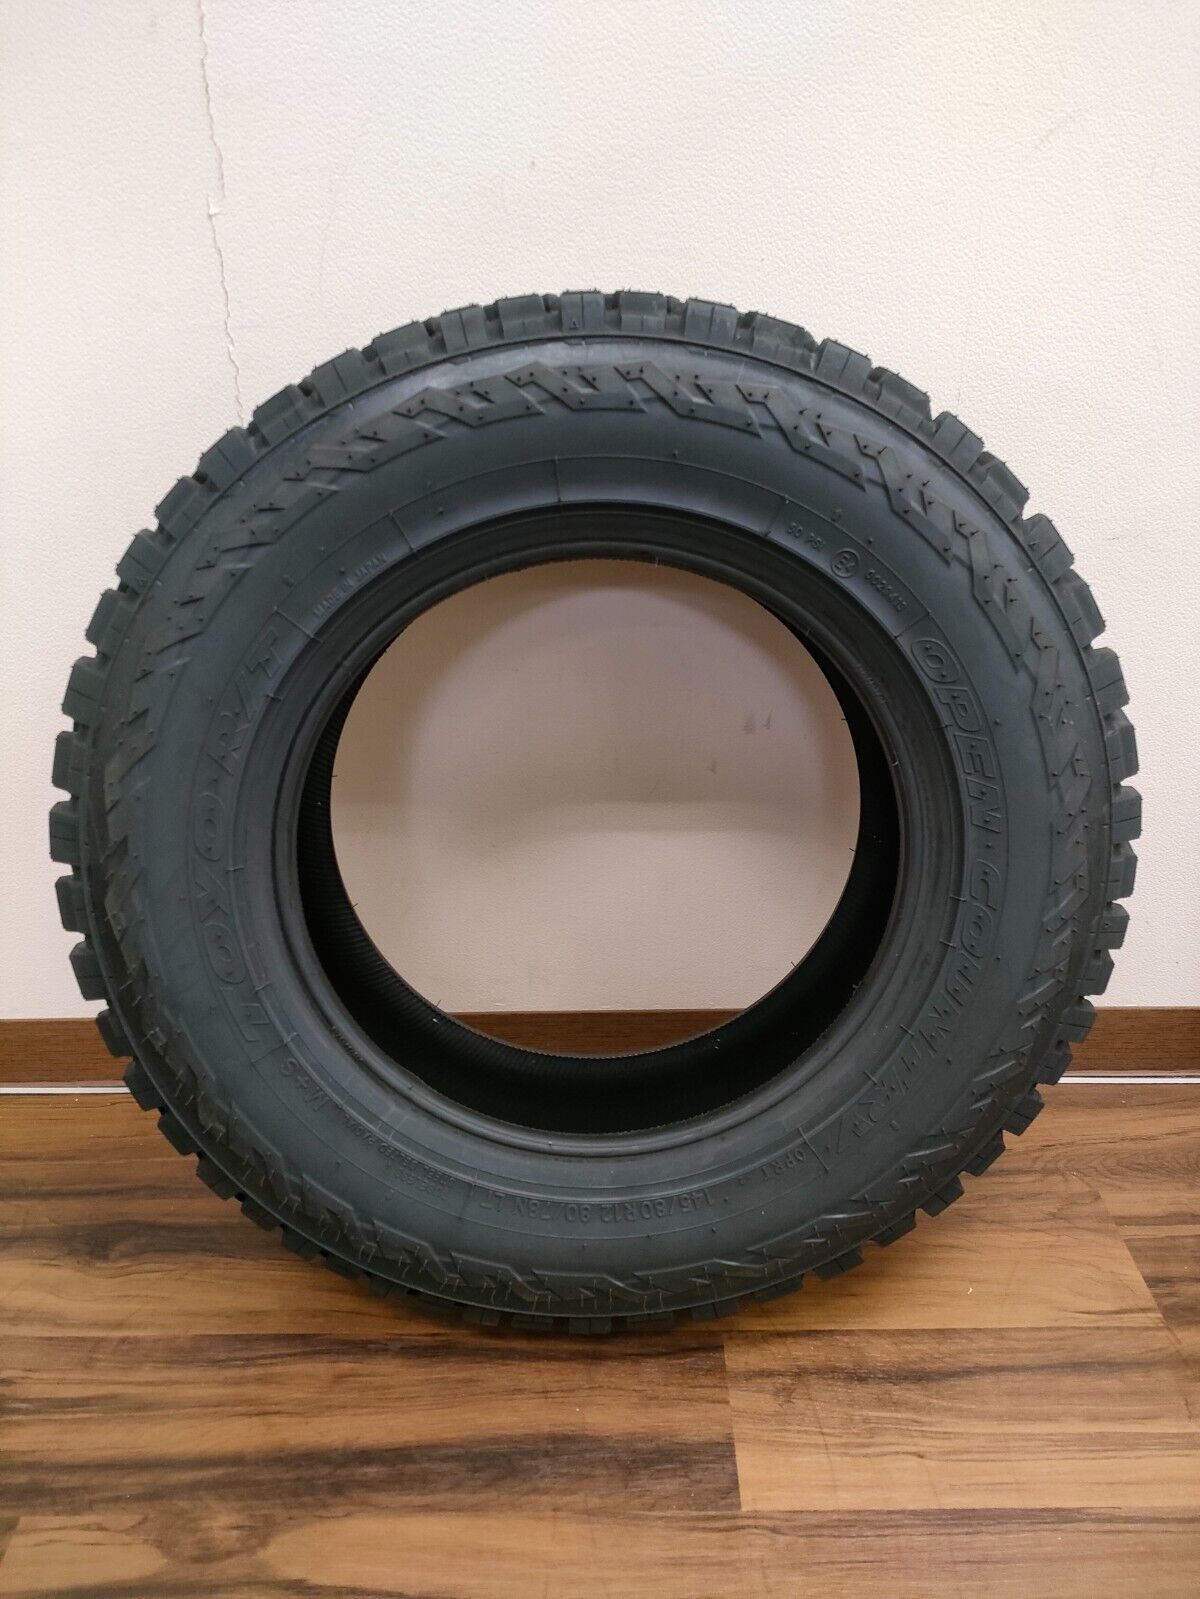 Toyo Open Country R/T 145/80R12 (145R12) x1 Tires Snow Mud Suv Tire for Off Road